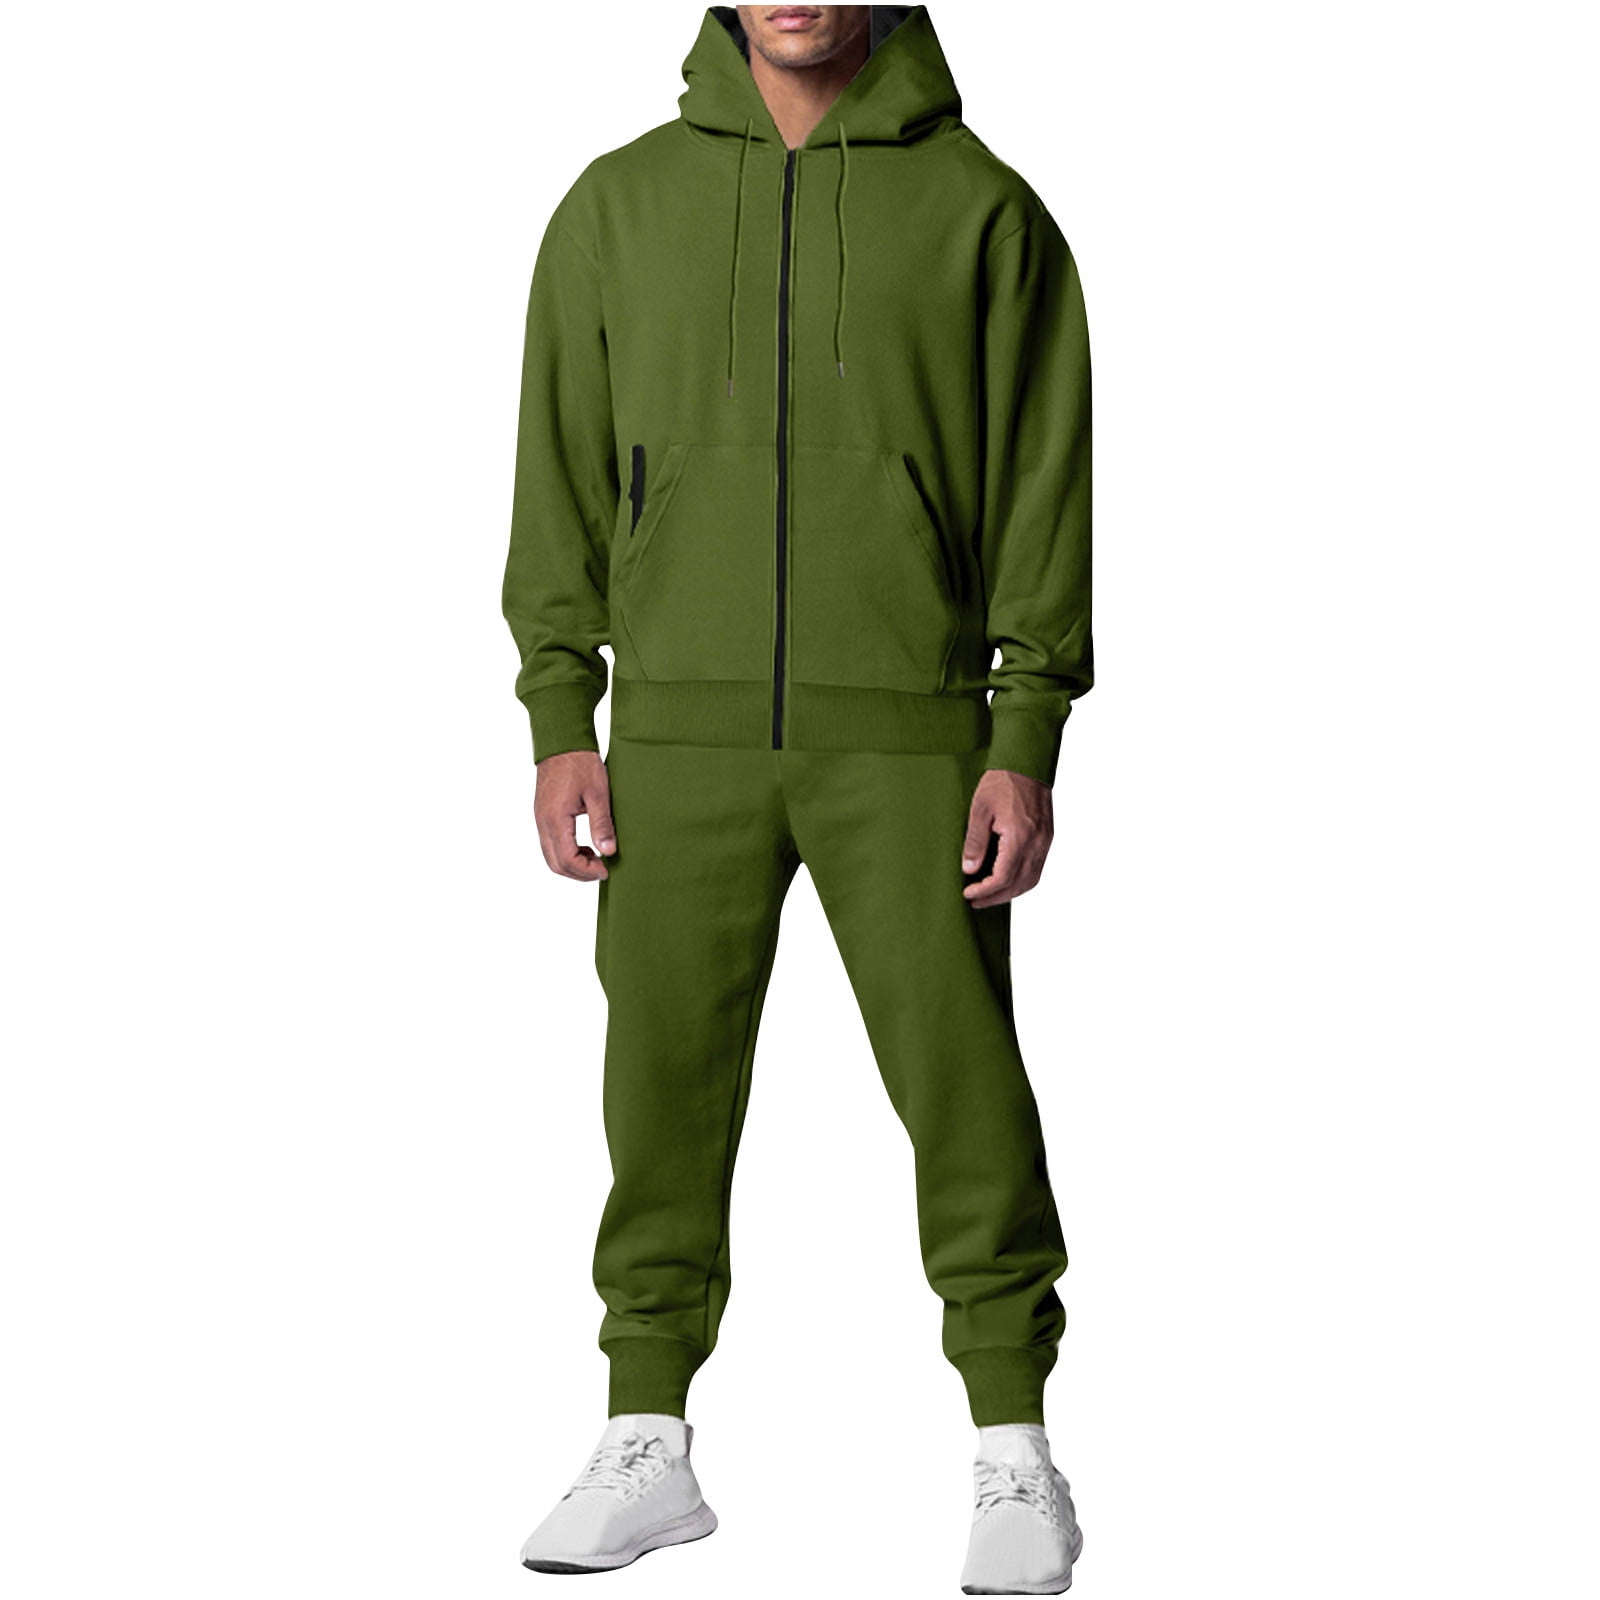 Amtdh Sweatsuits for Men Clearance Solid Color Zip Up Hoodies ...